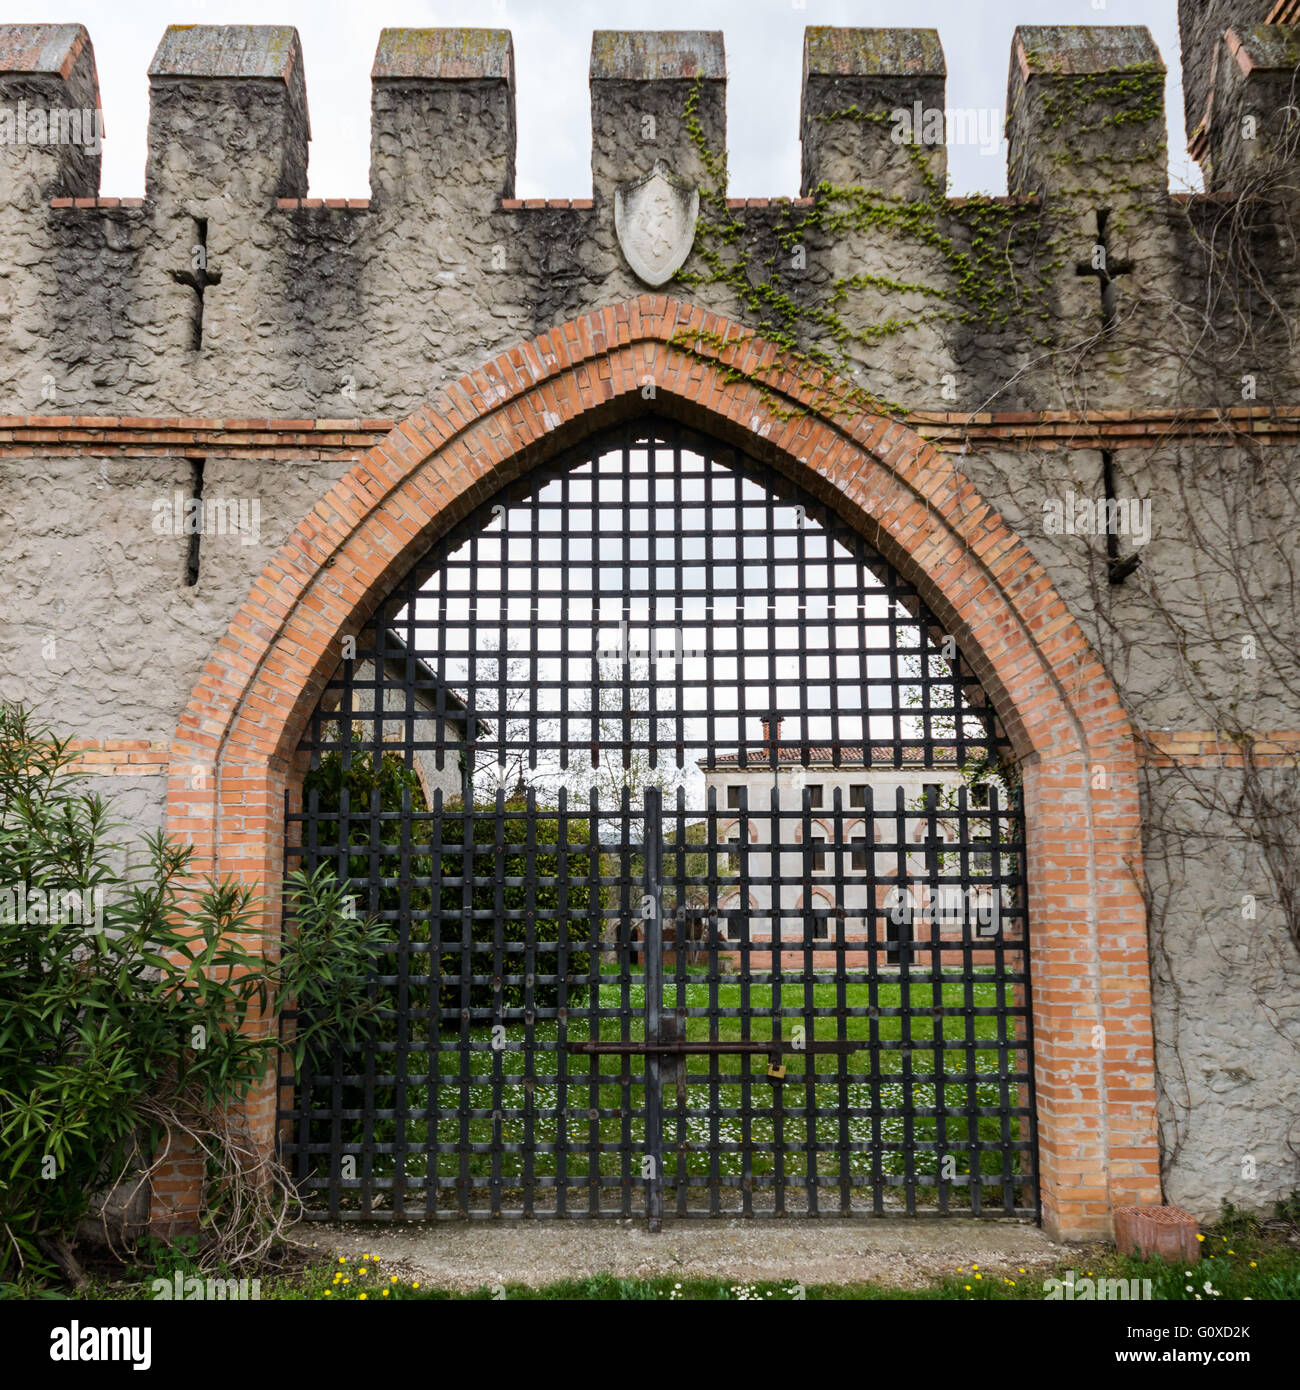 arched entrance of a medieval castle closed by an iron grille gate. Stock Photo